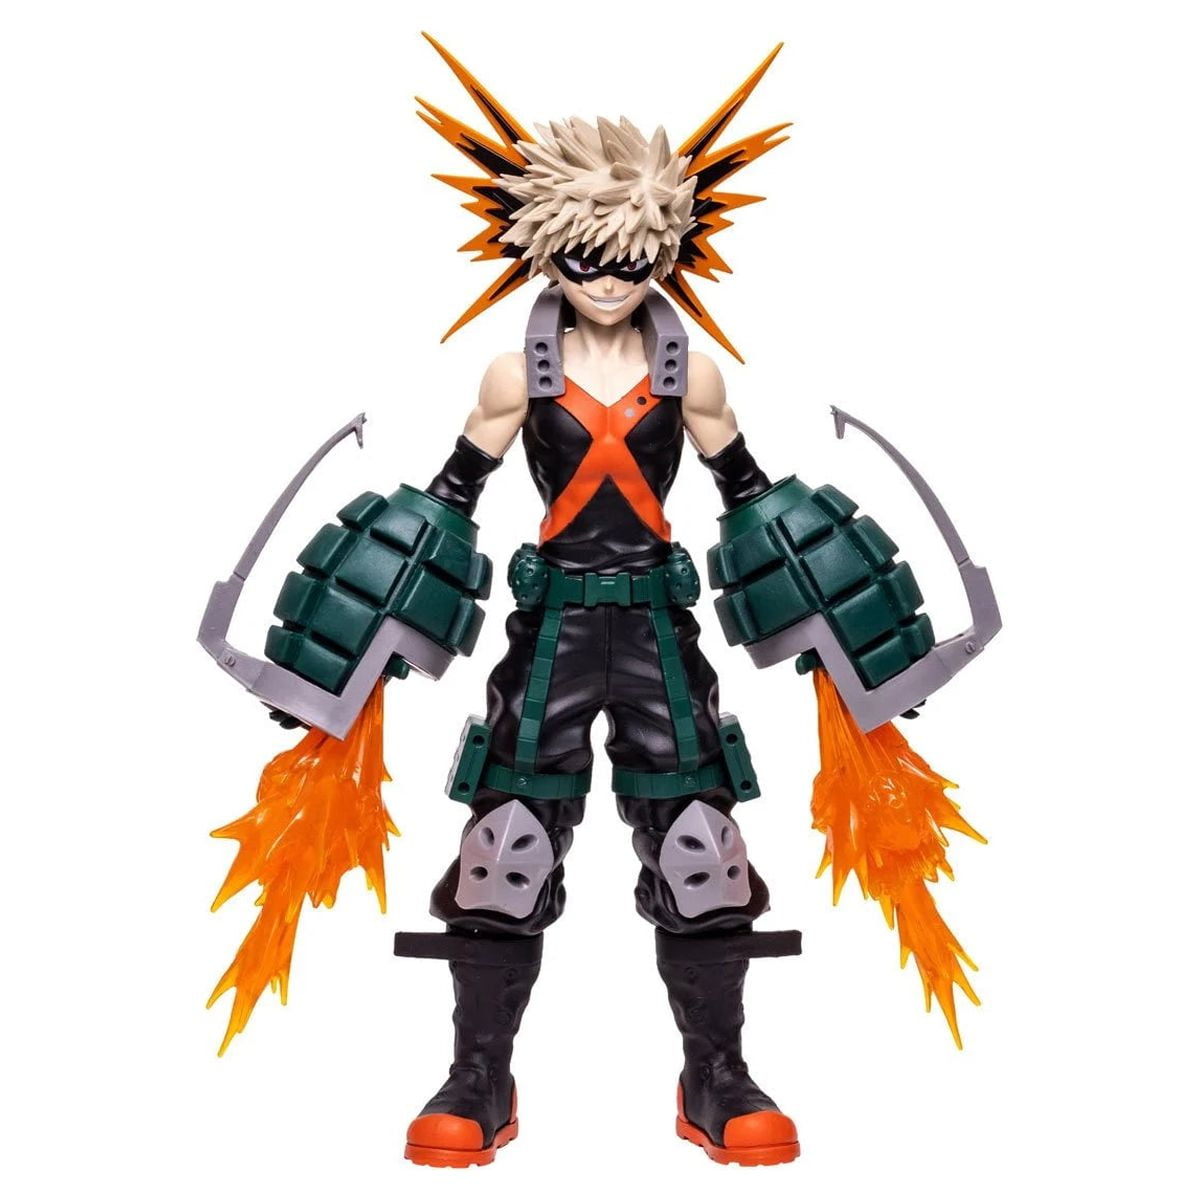 dean schnitzmeyer recommends images of bakugo pic